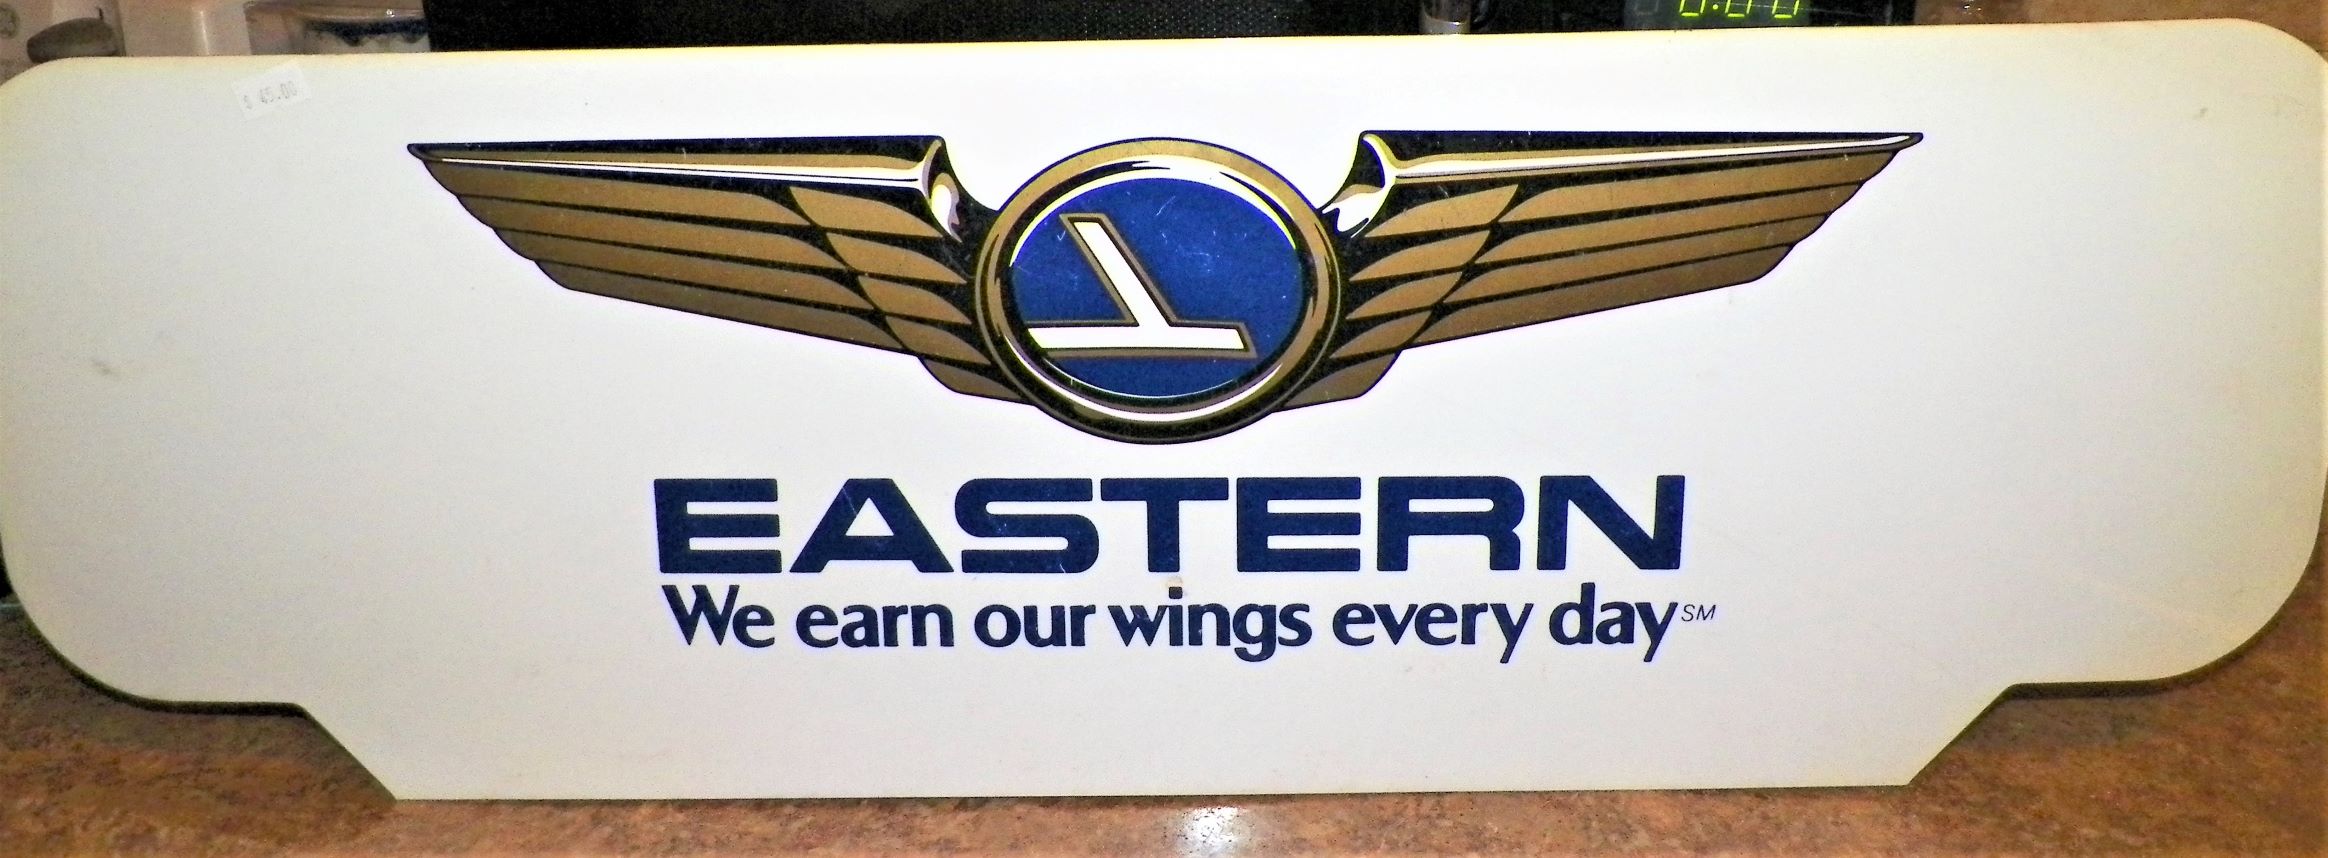 COLLECTIBLE SIGN EASTERN AIRLINES 1AA.JPG